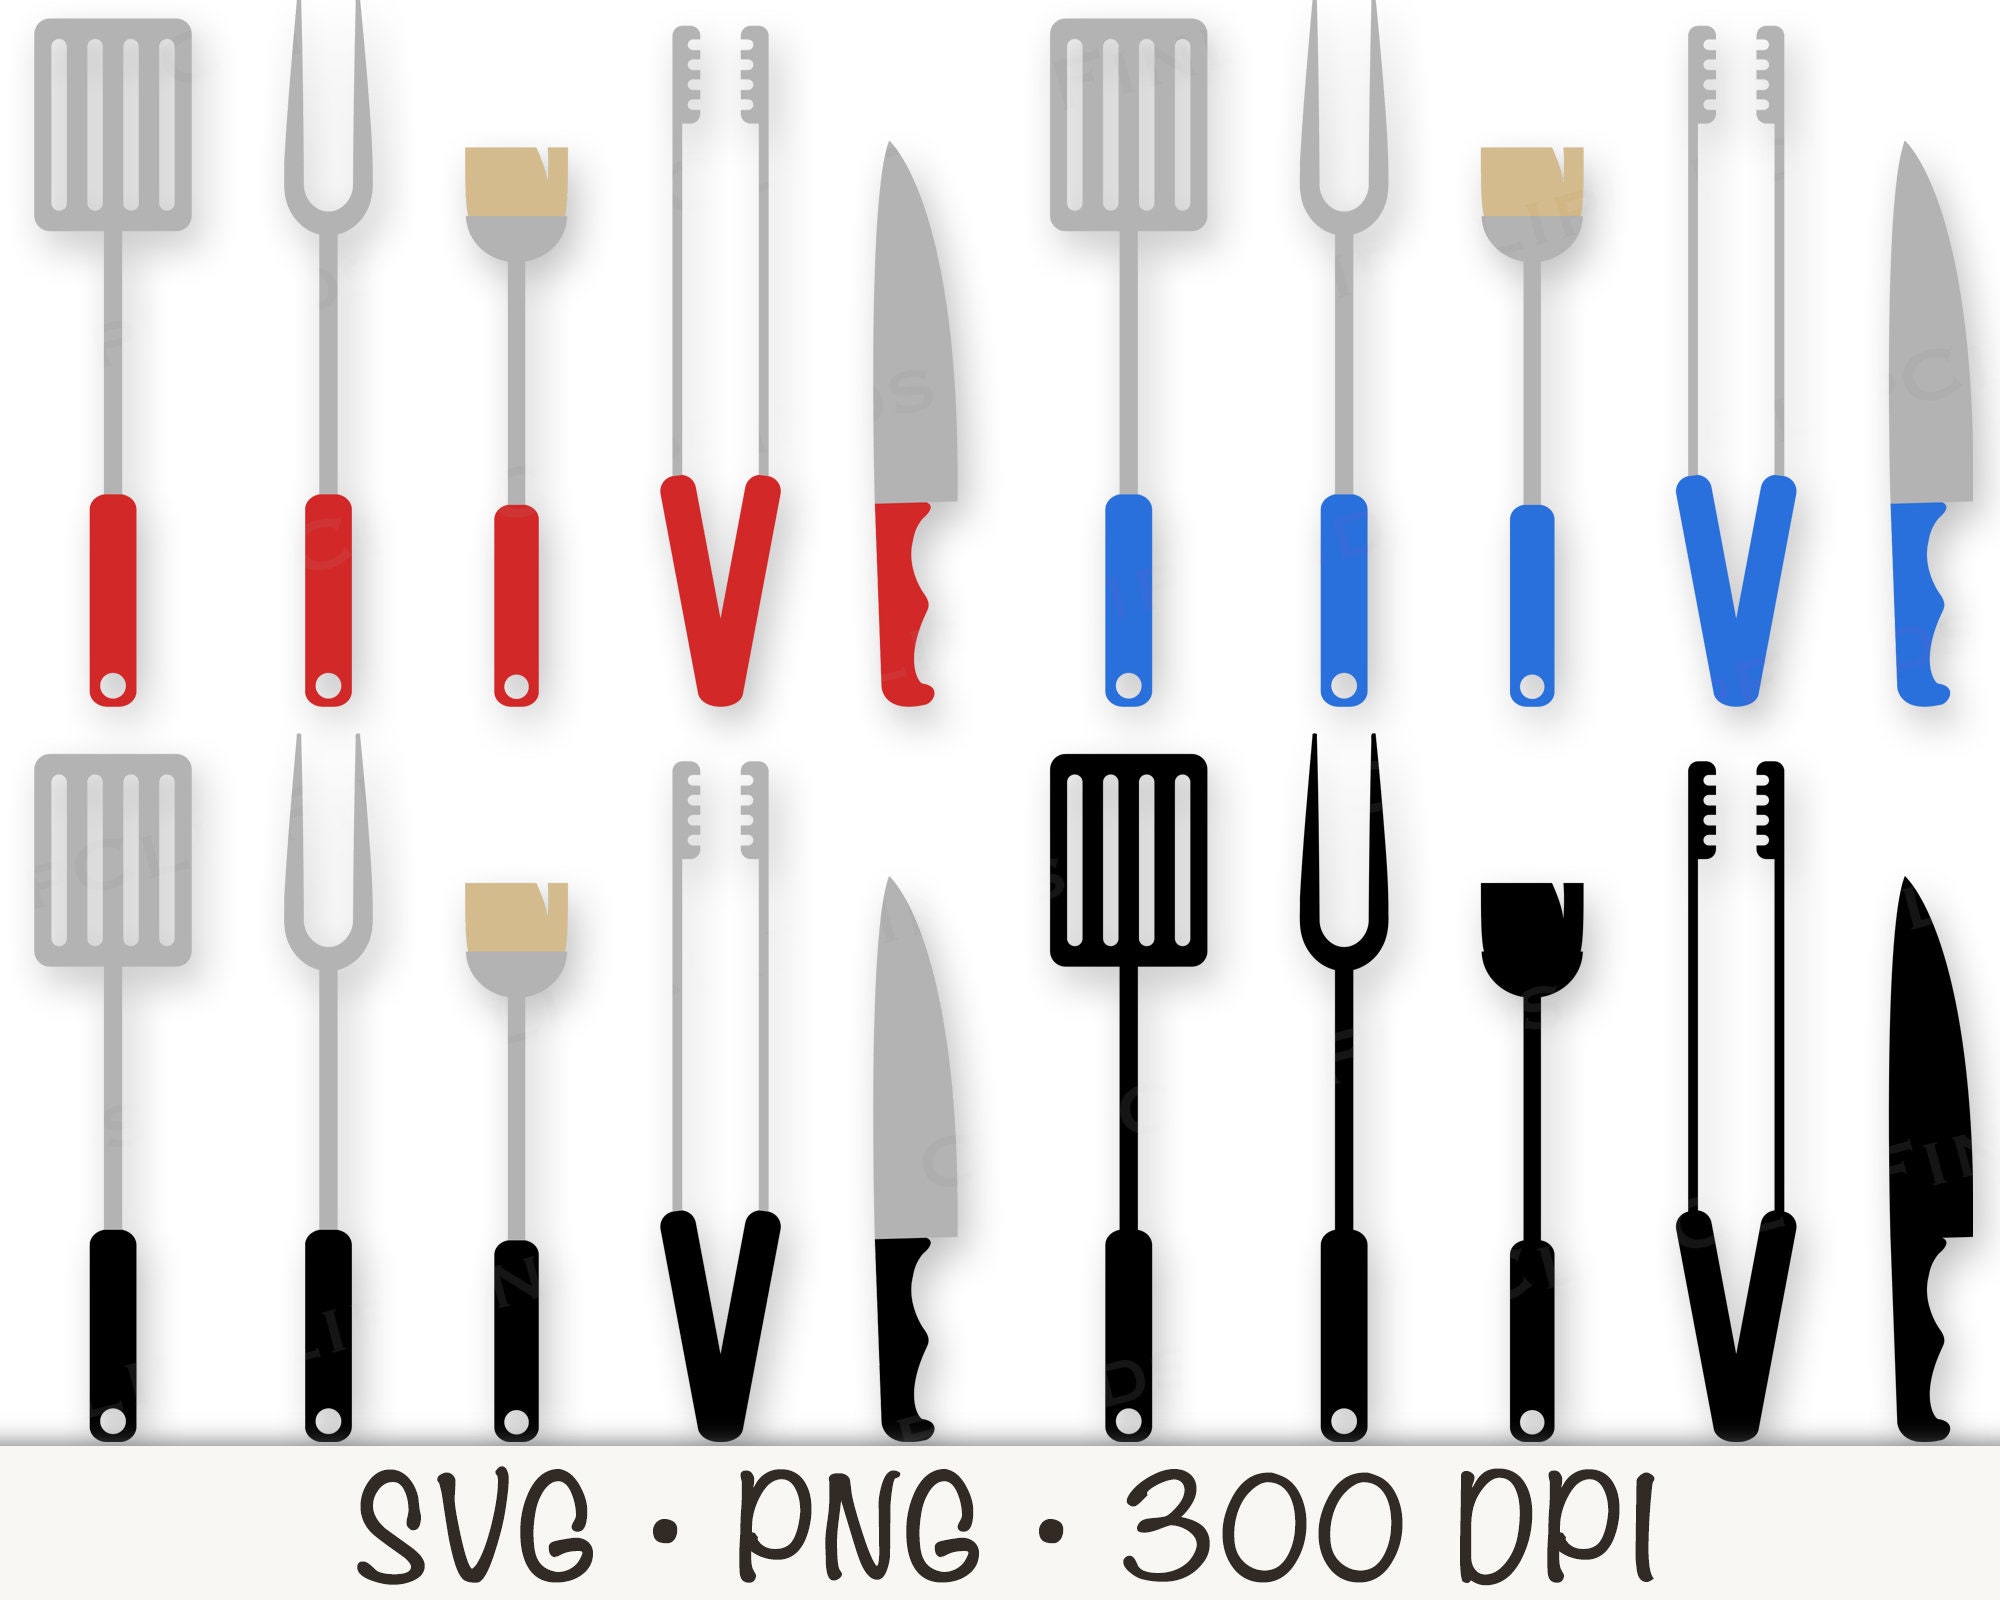 BBQ Utensils SVG, Grill Tools Silhouette, Barbeque Clipart, Cooking Utensils  Cut File, Bbq Tongs PNG, Bbq Fork Outline, Grill Spatula Vector 